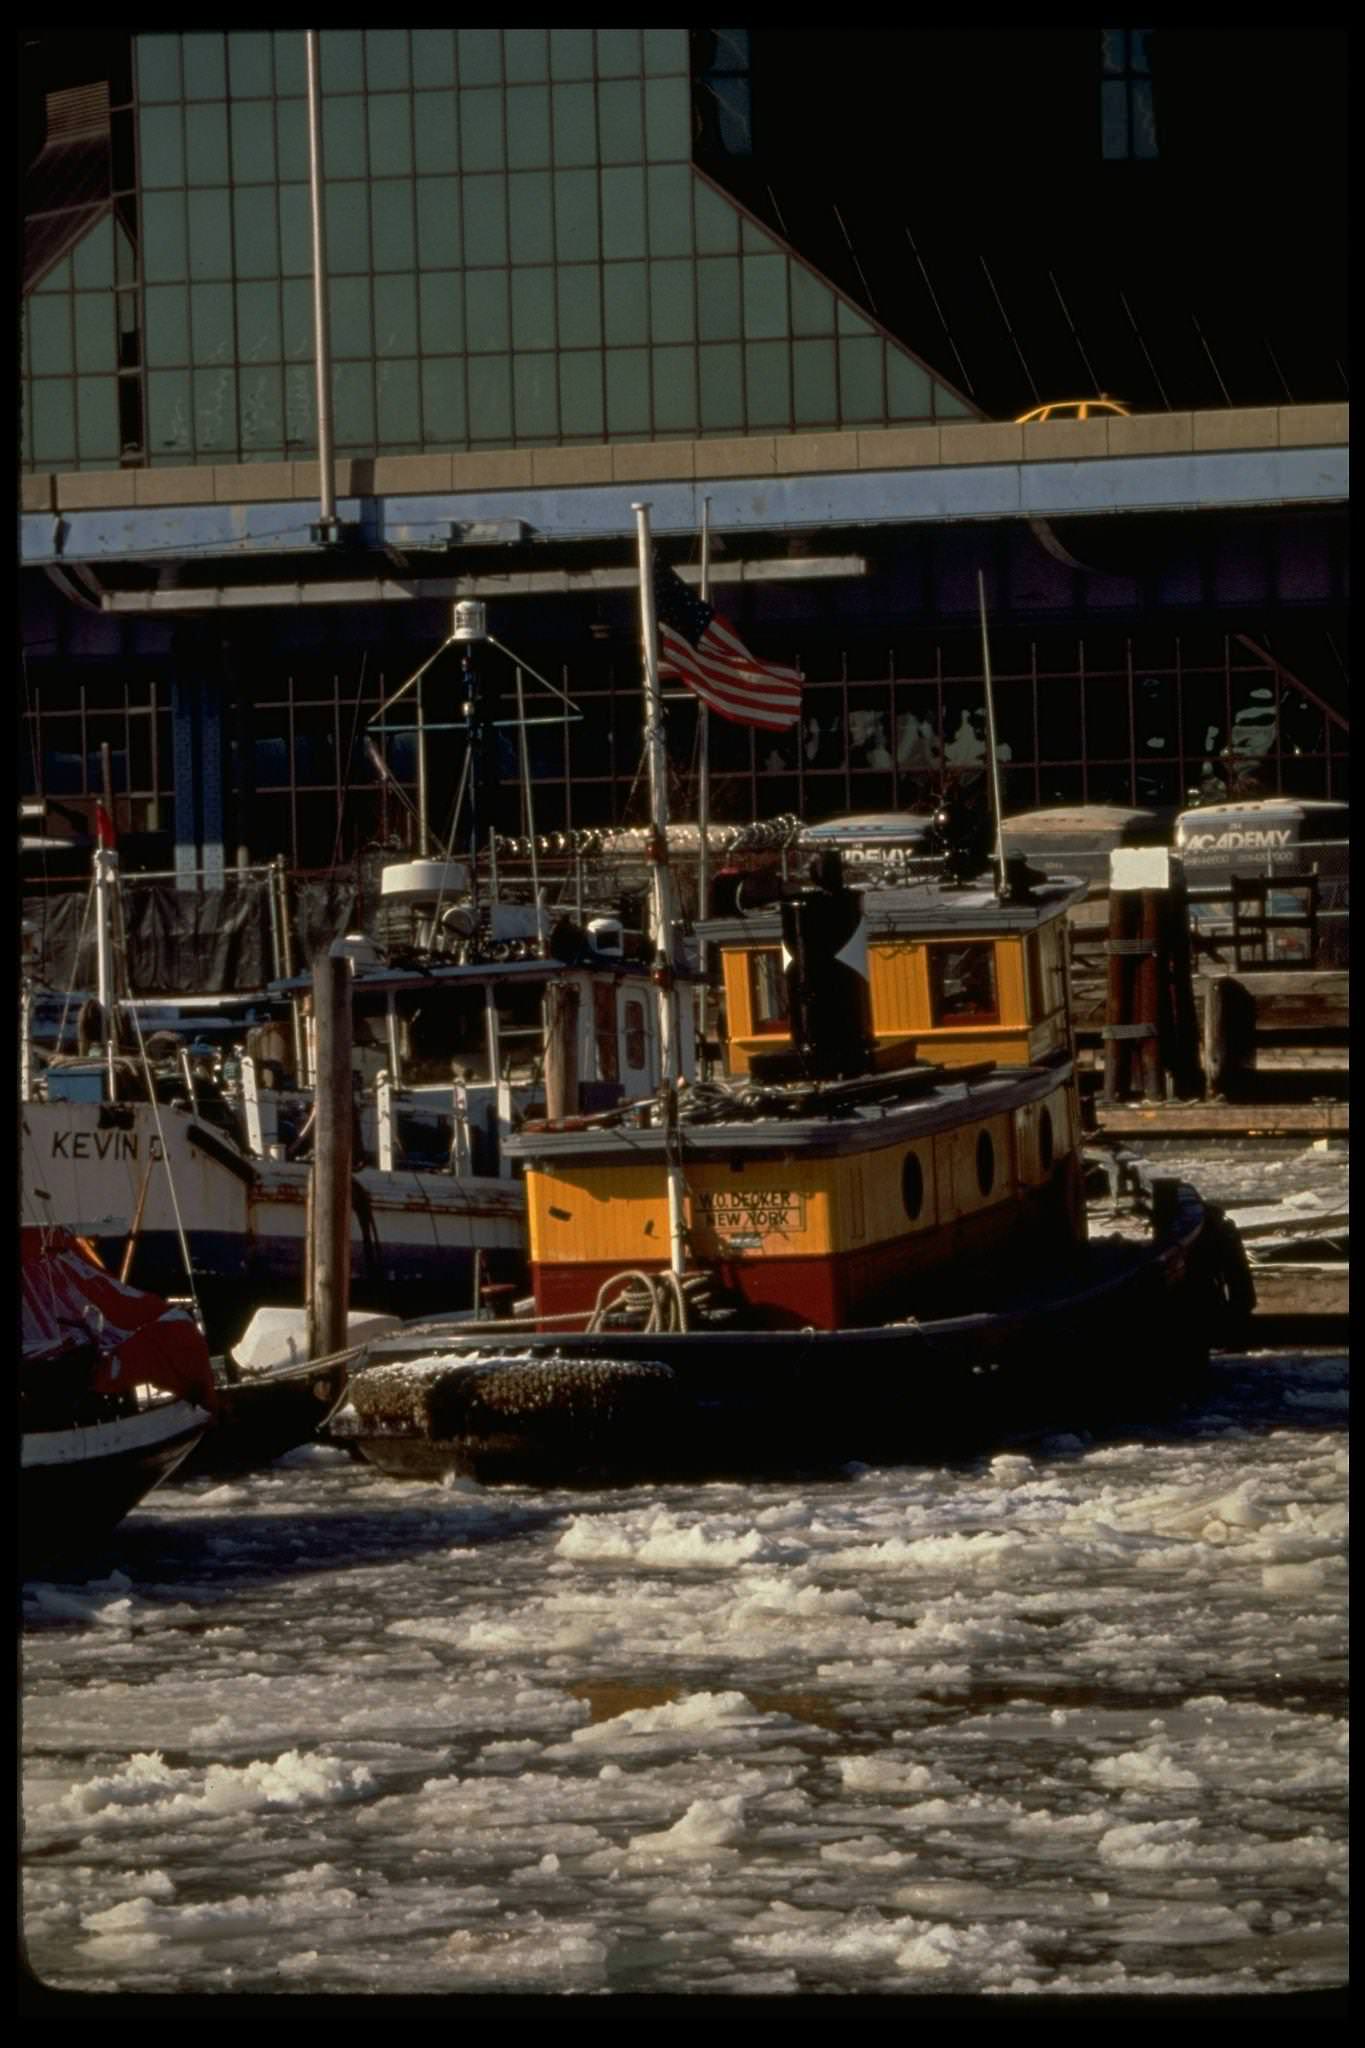 Tugboat At Dock At South Street Seaport In Frozen East River During Cold Spell, Manhattan